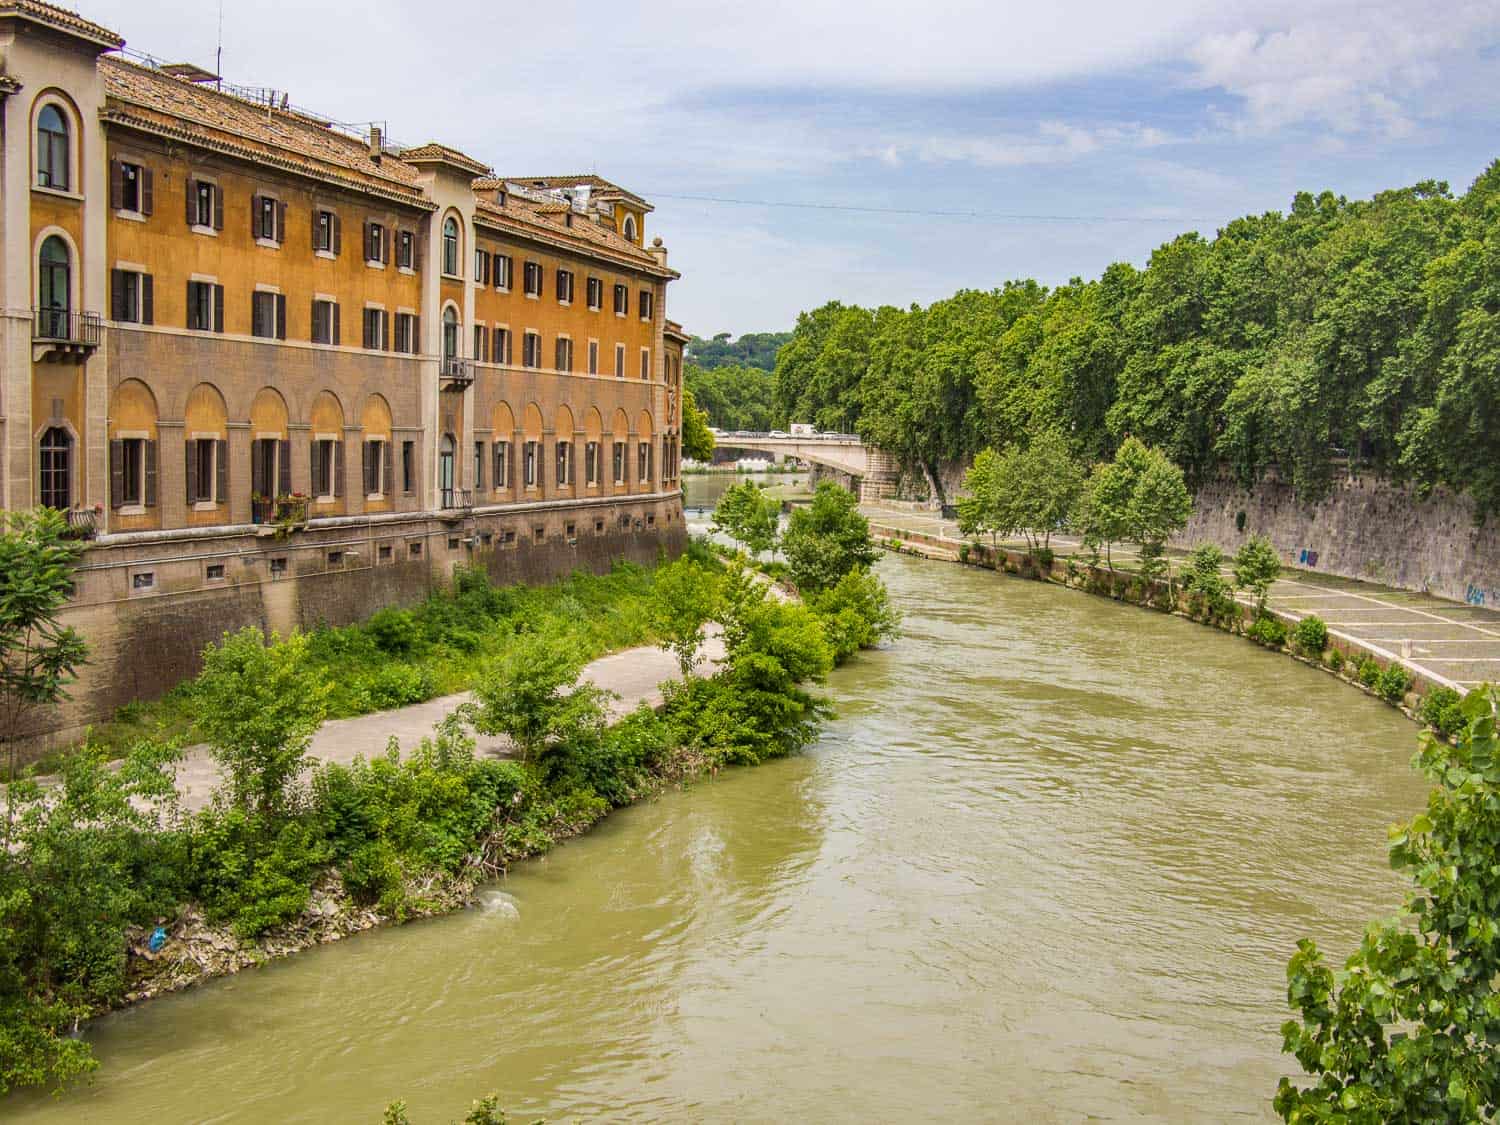 Tiber island in Rome connects Trastevere to the Jewish Ghetto, Rome, Italy